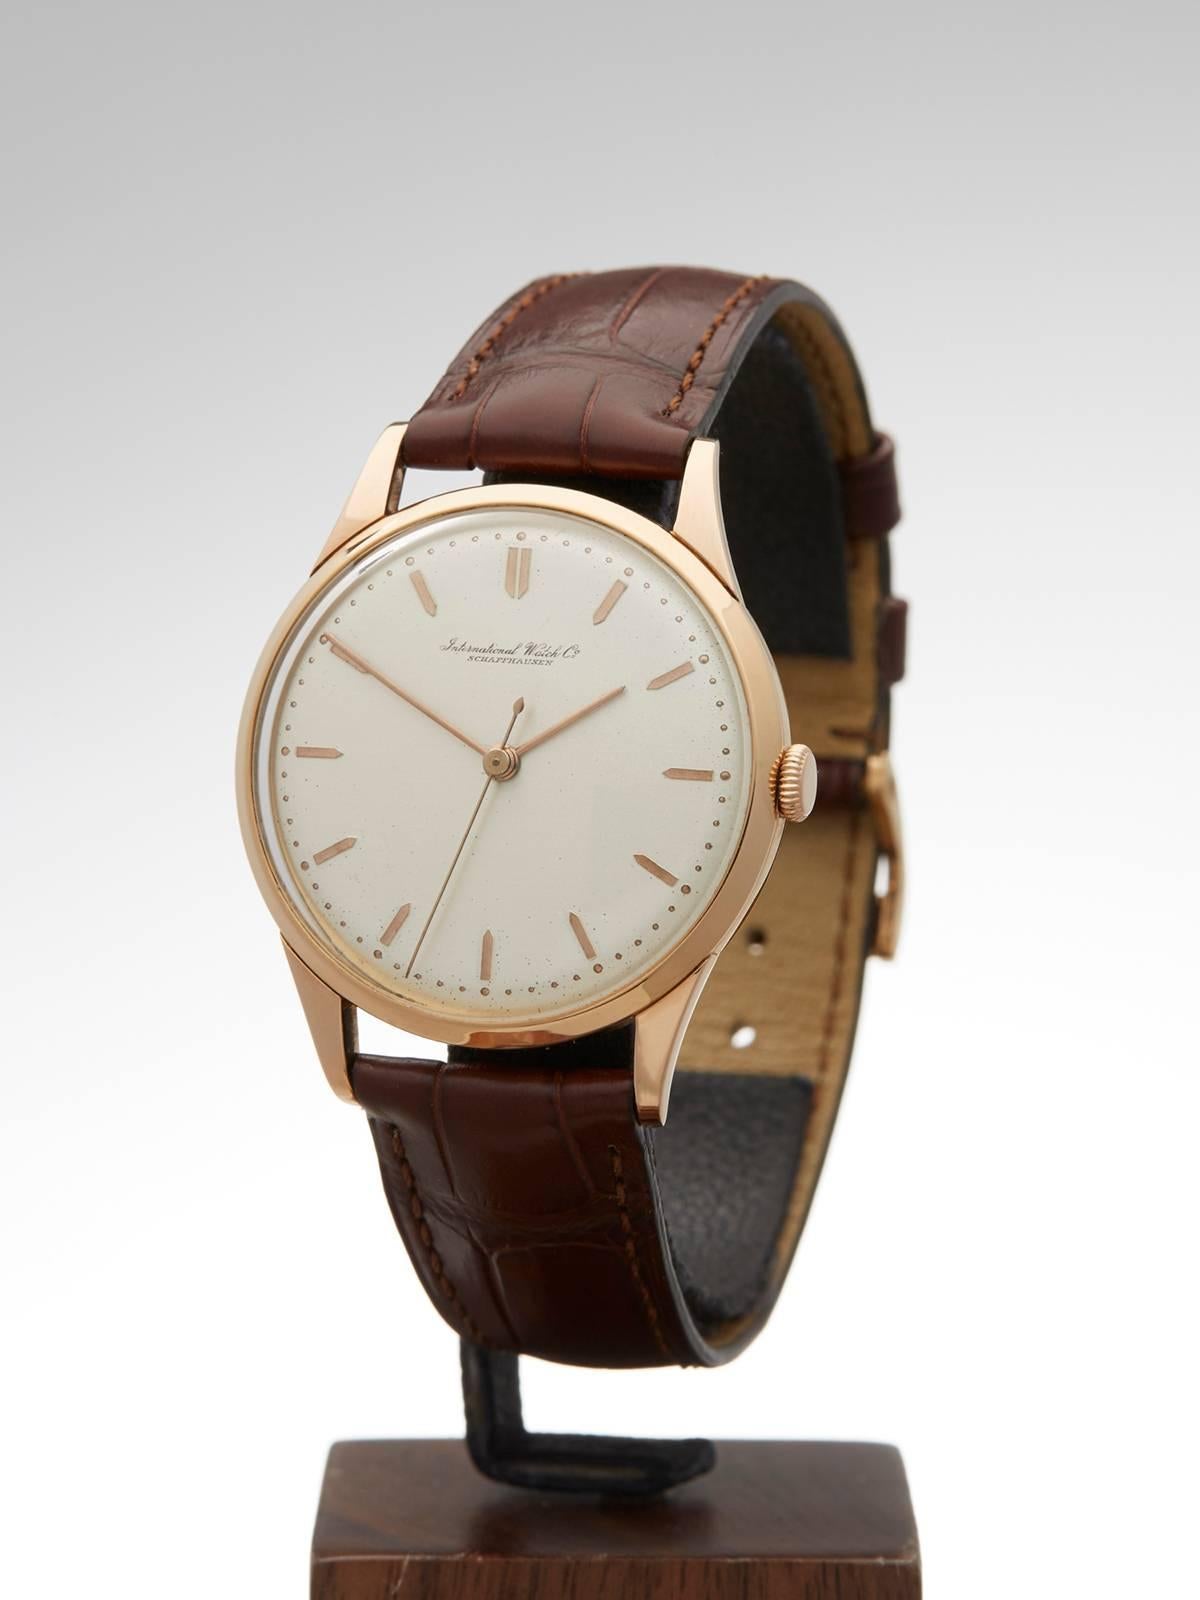 Ref: COM697
Model Number: Calibre 89
Condition: 9 - Excellent Condition
Age: 1948
Case Diameter: 35 mm
Case Size: 35mm
Box and  Papers: Box Only
Movement: Mechanical Wind
Case: 18k Rose Gold
Dial: Silver
Bracelet: Brown Leather
Strap Length: